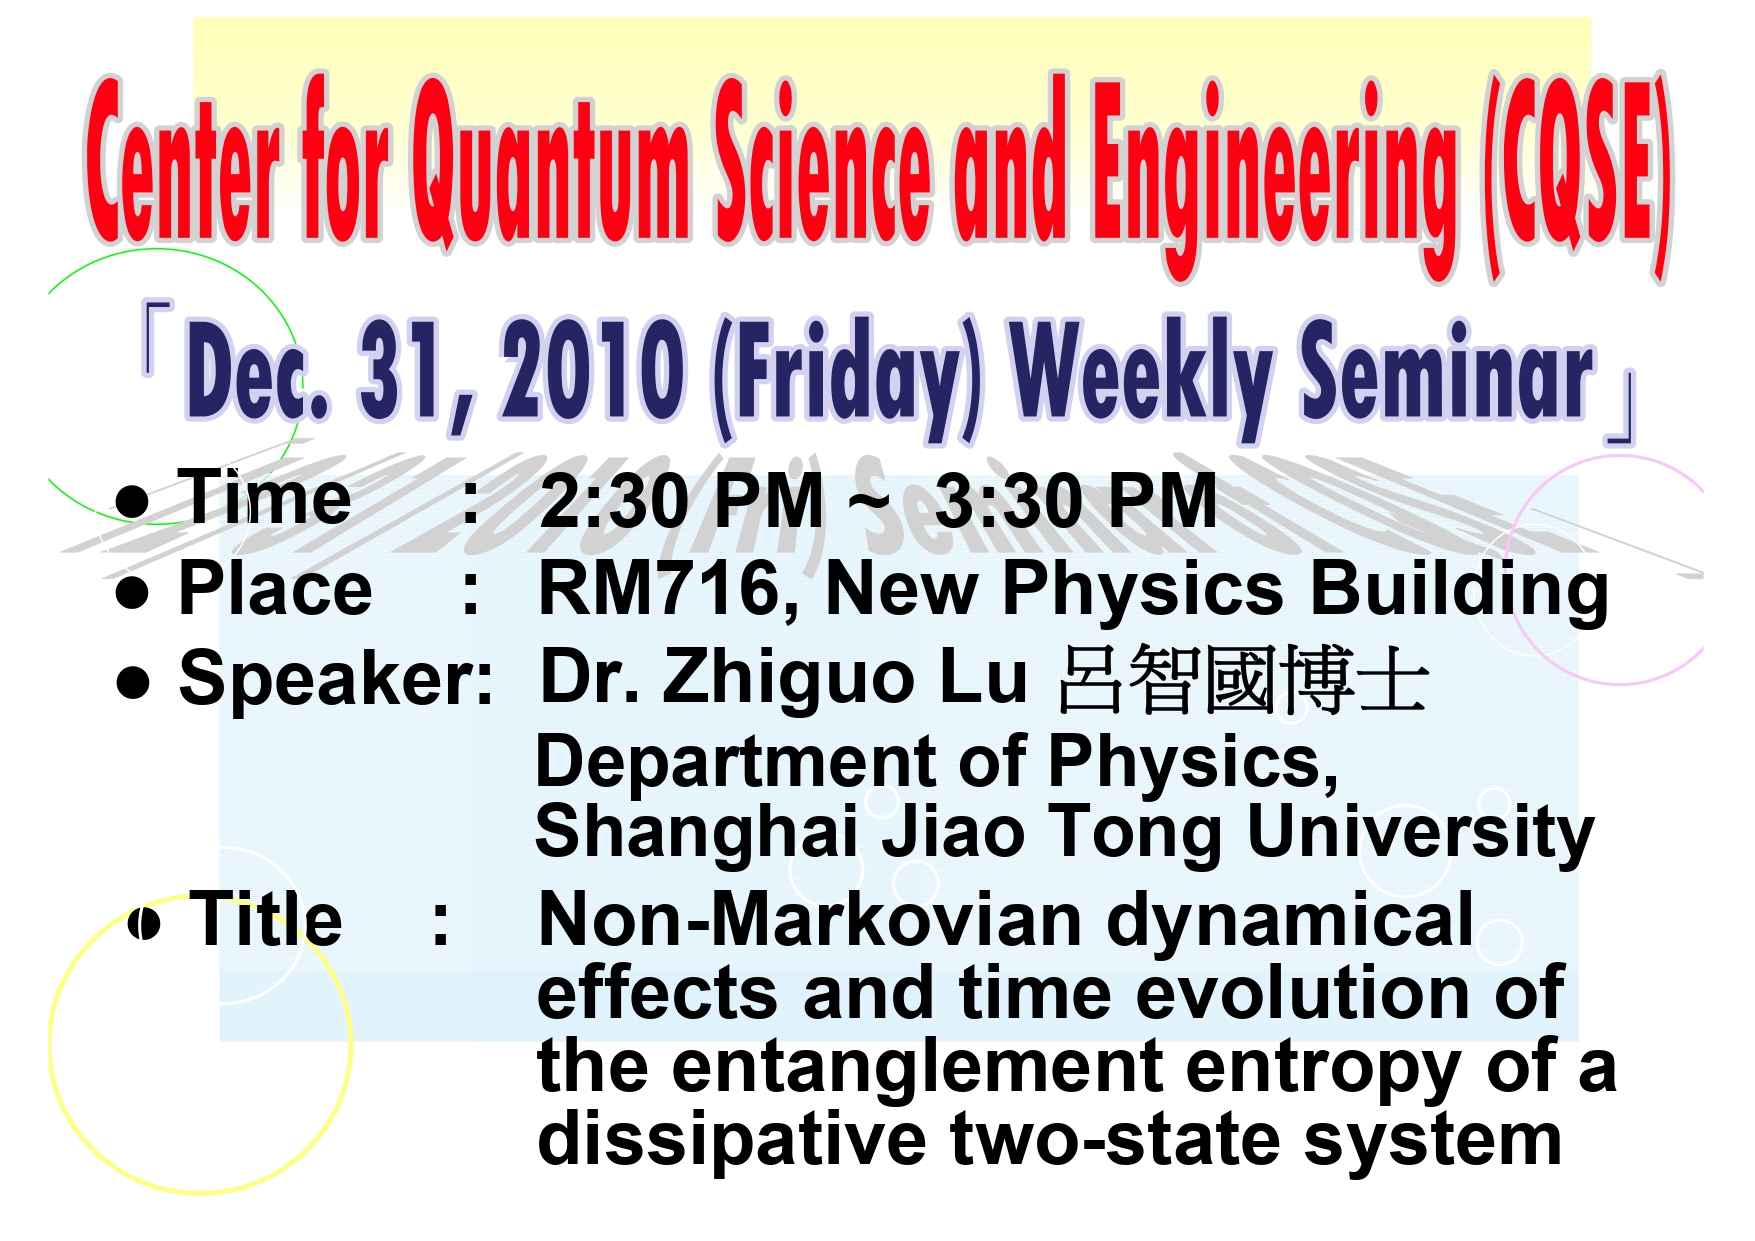 Seminar of Center for Quantum Science and Engineering (CQSE)